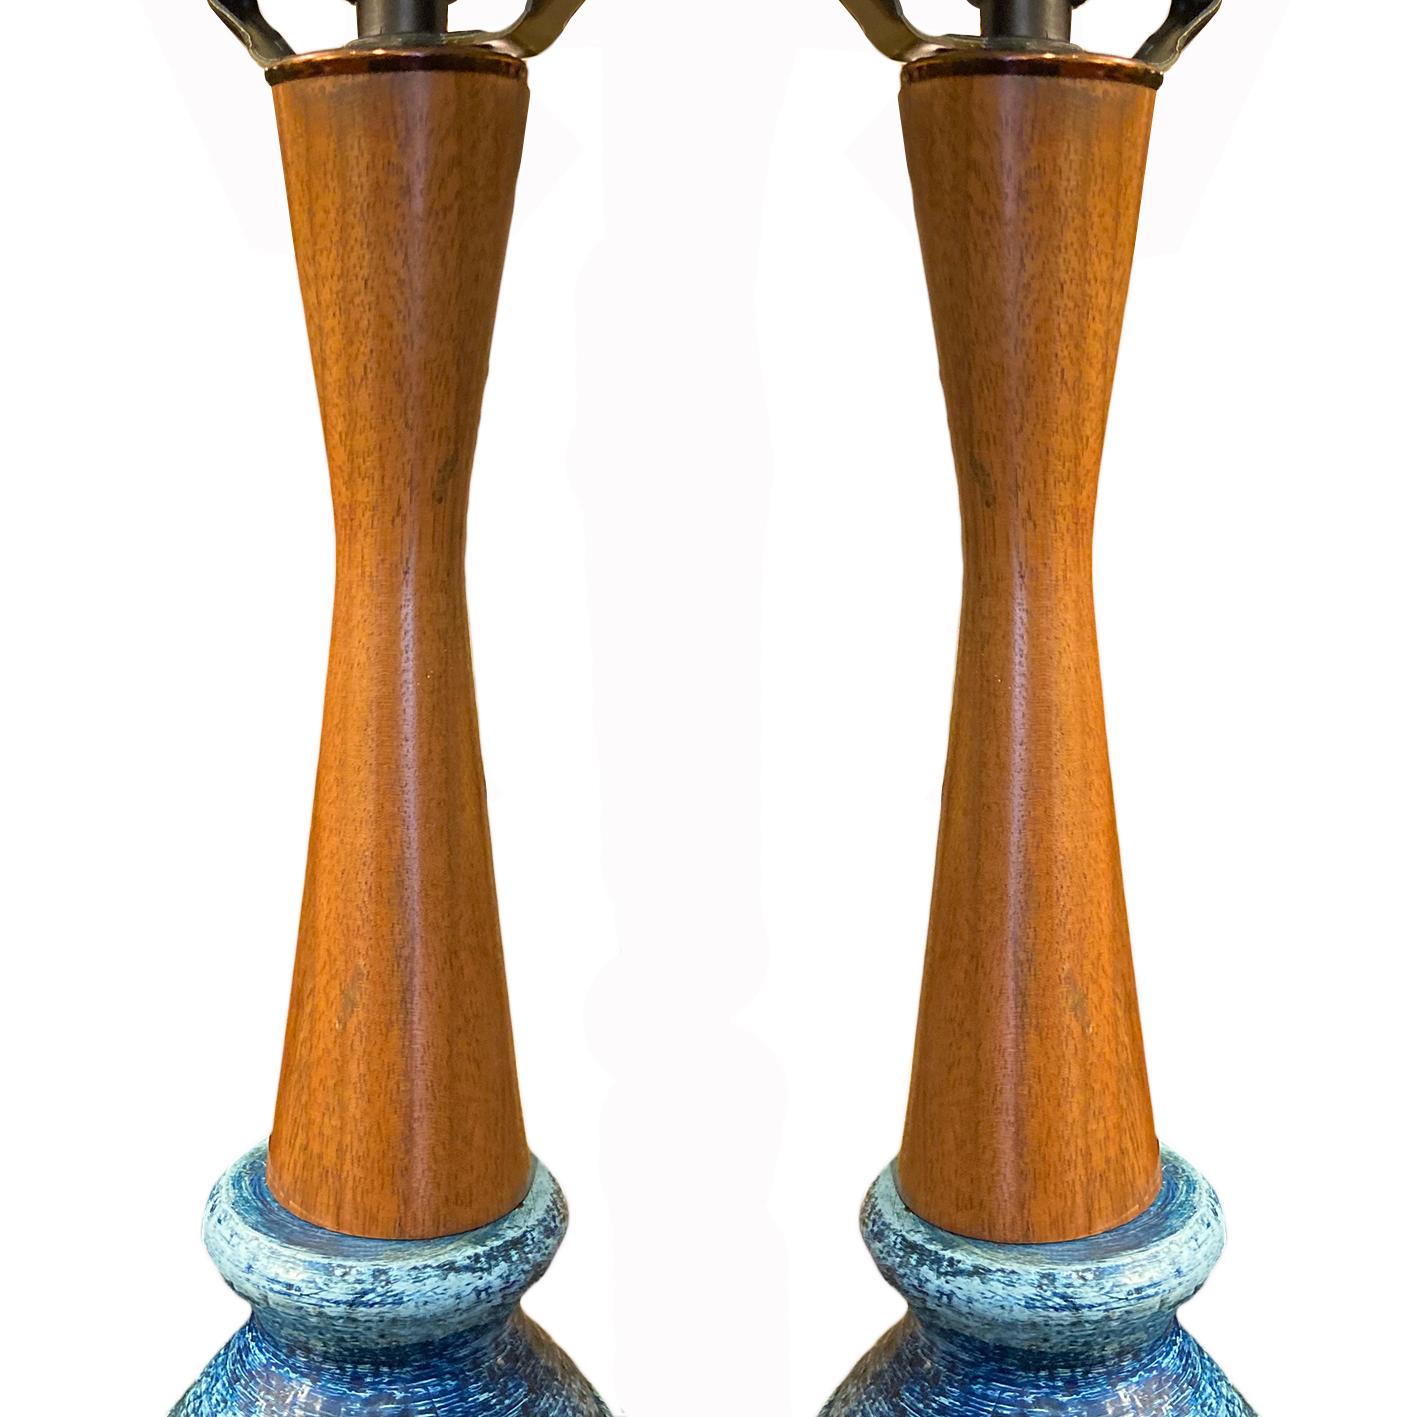 A pair of circa 1950's Italian blue table lamps with wood stems.

Measurements:
Height of body: 22.5